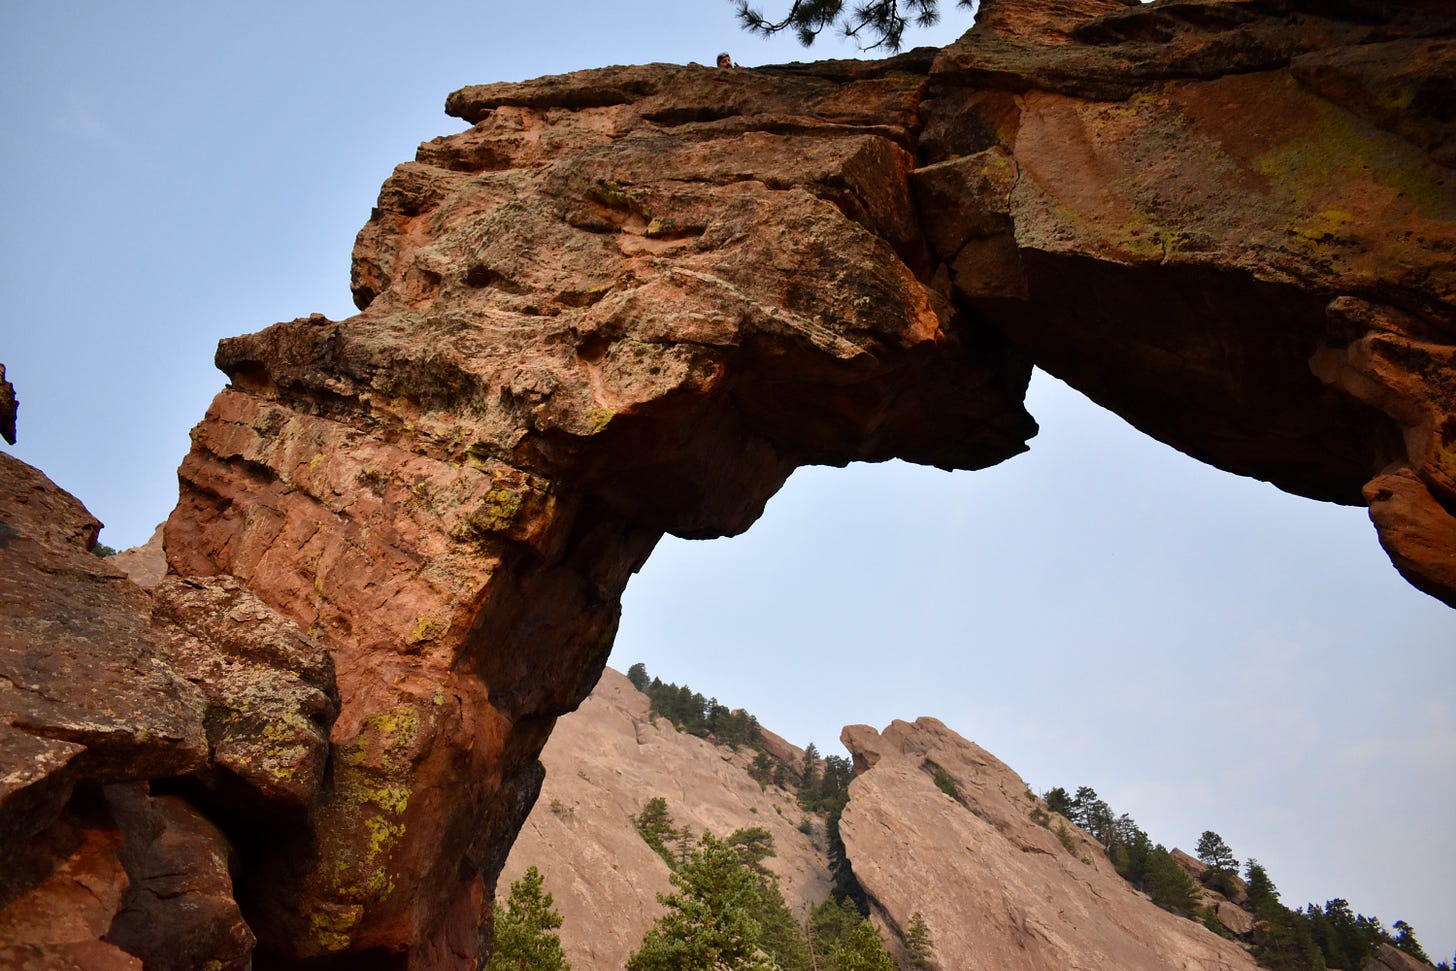 a climber looks down from atop an arched rock formation.